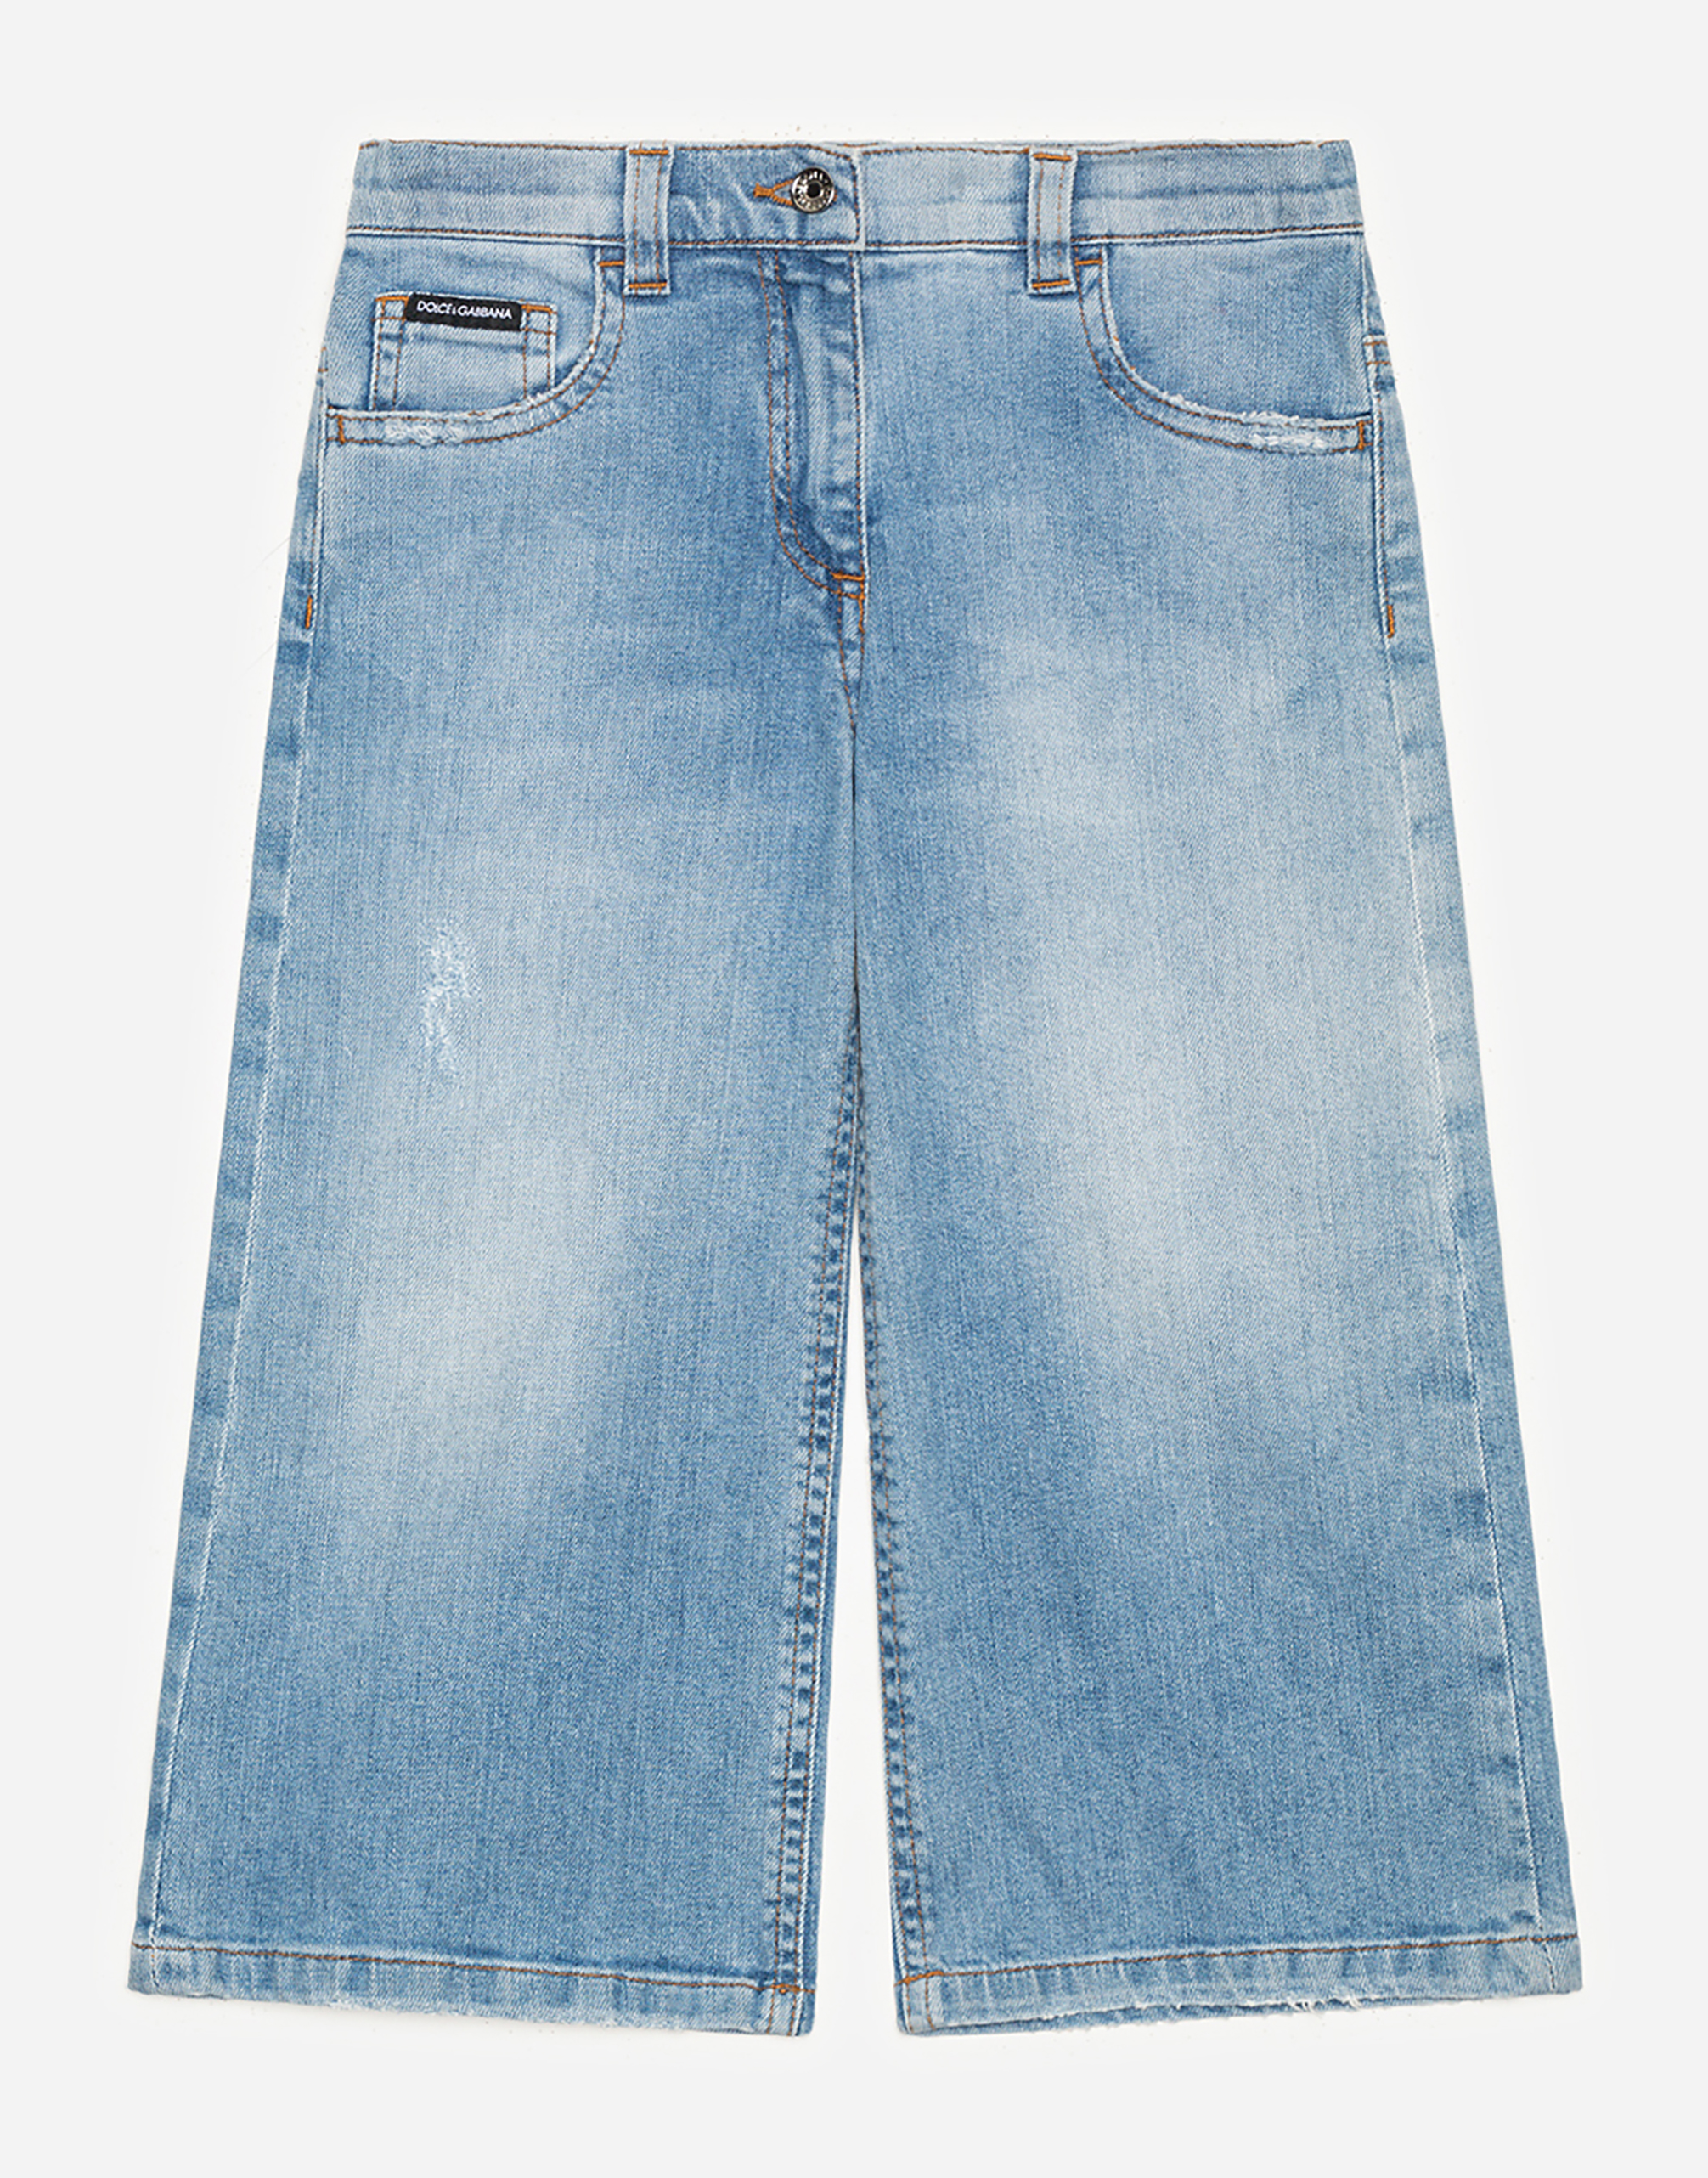 DOLCE & GABBANA Flared washed blue stretch jeans